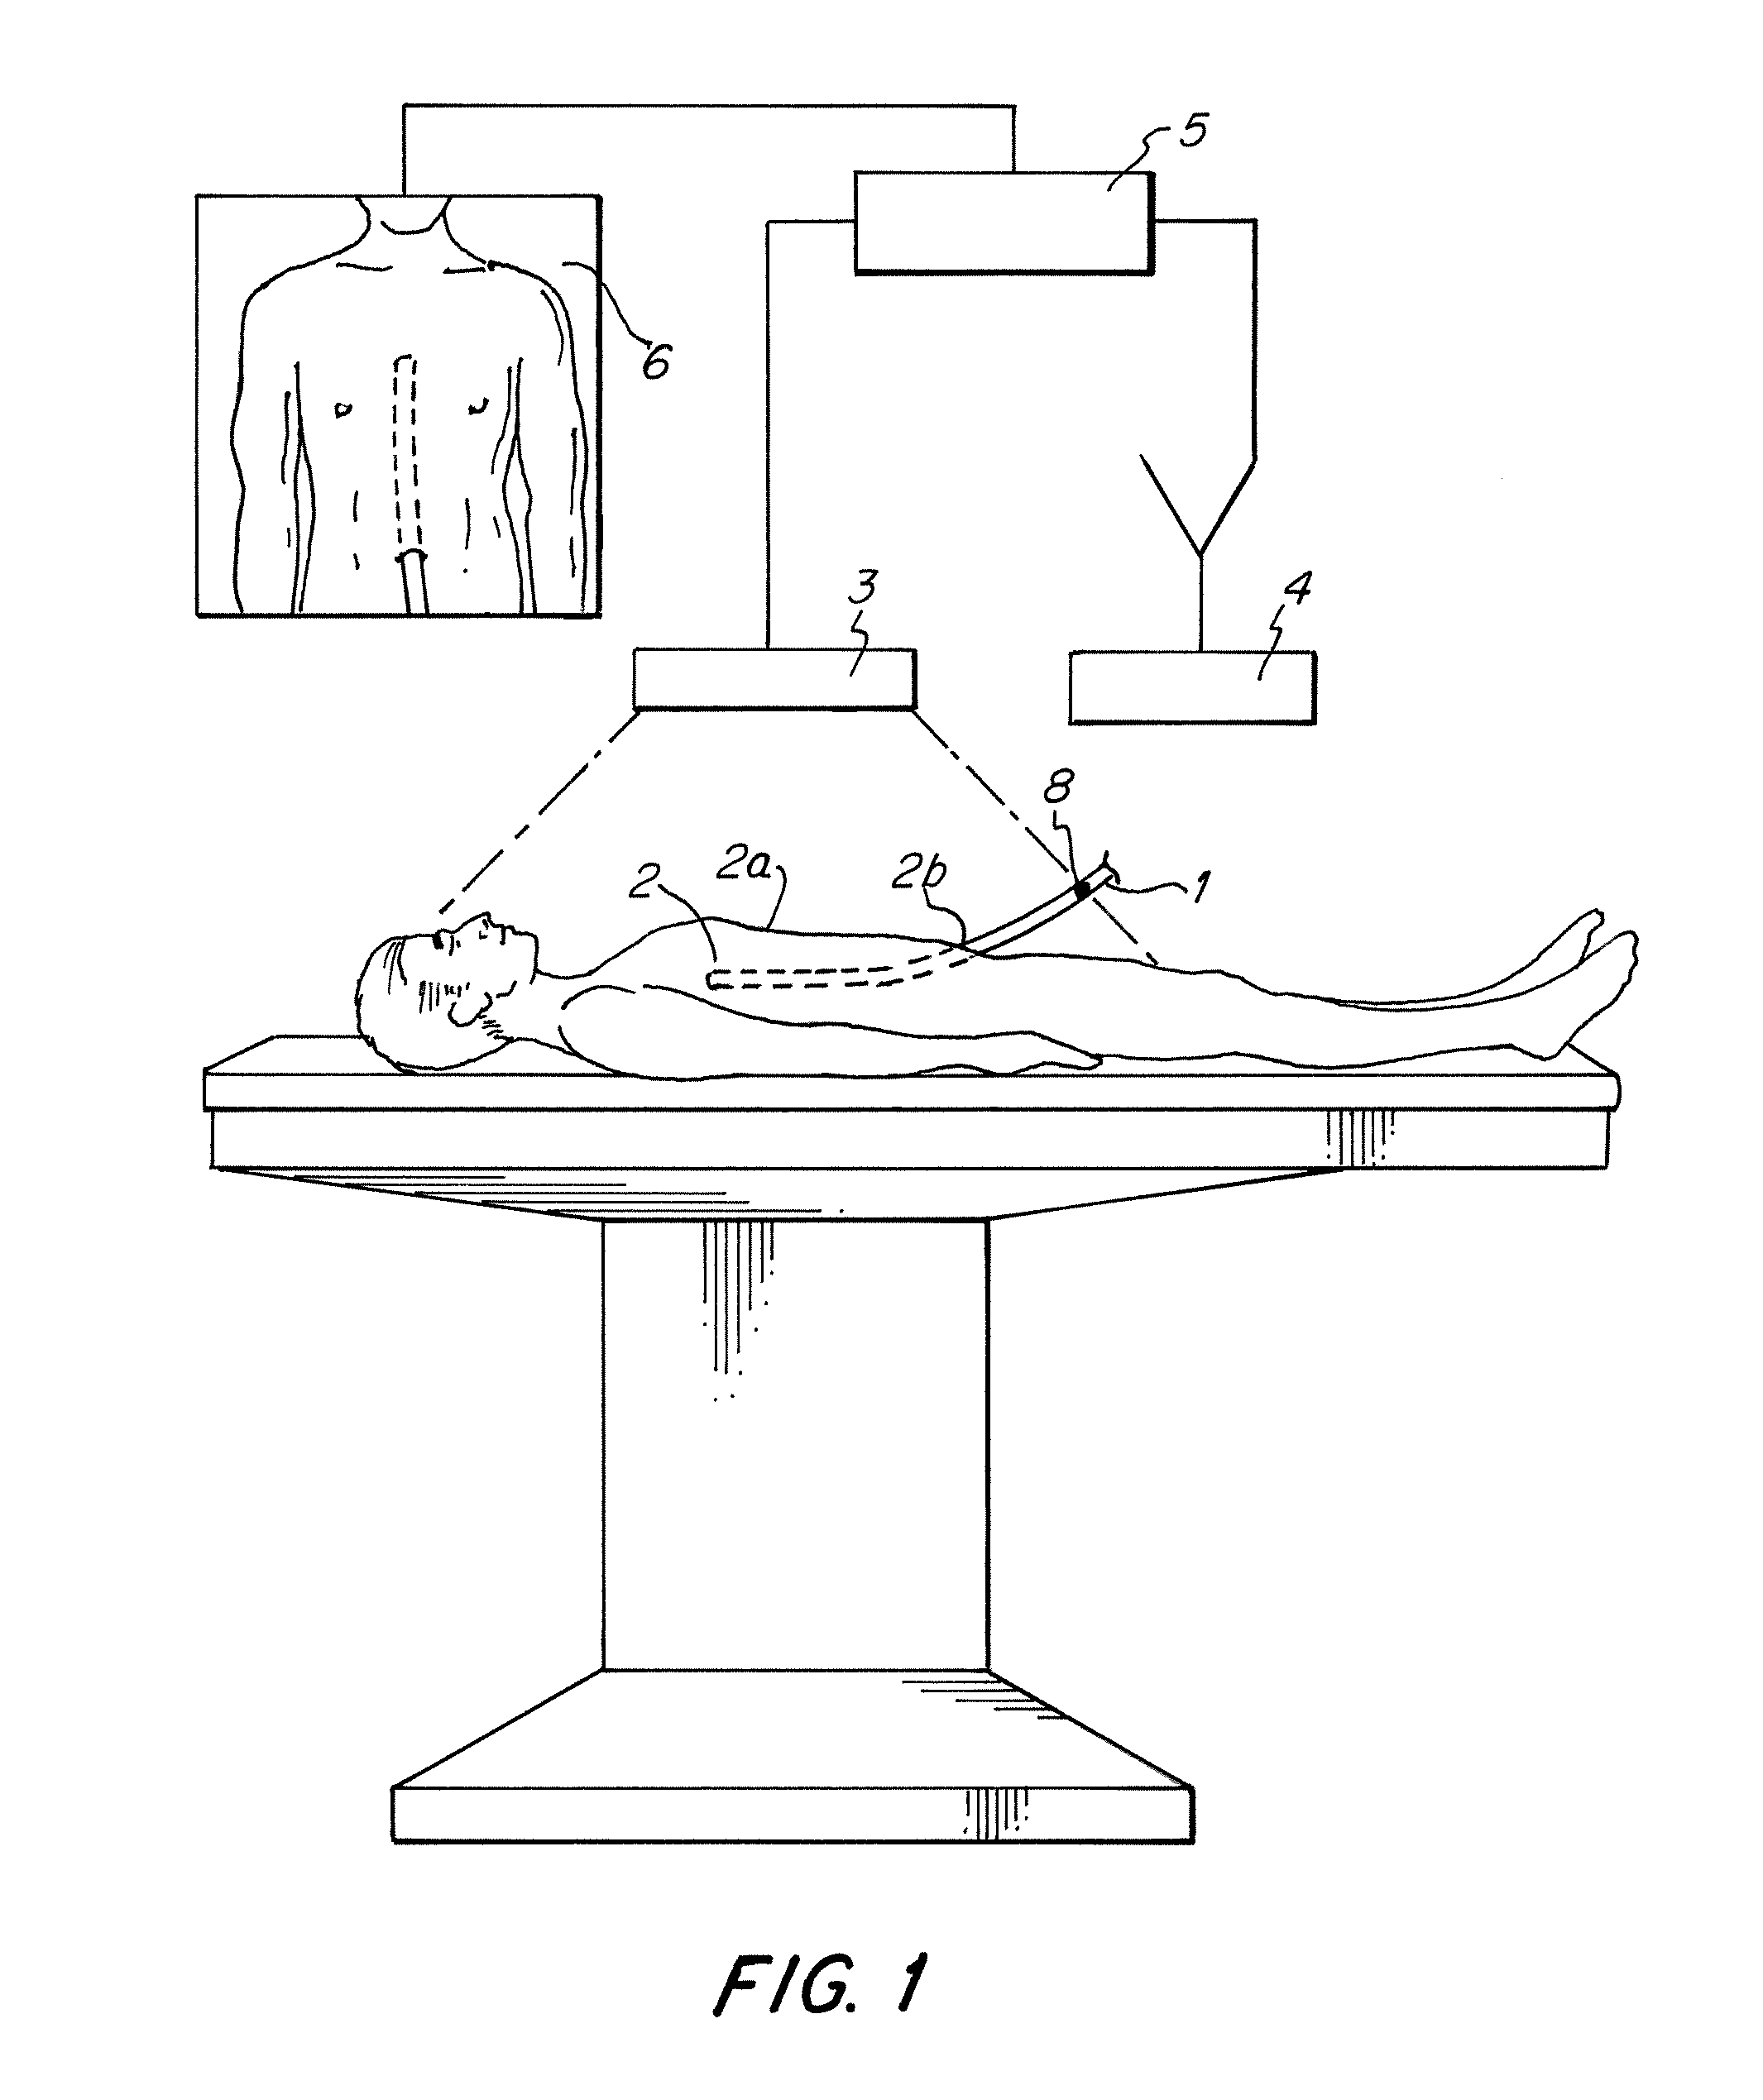 System for orientation assistance and display of an instrument in an object under examination particularly for use in human body